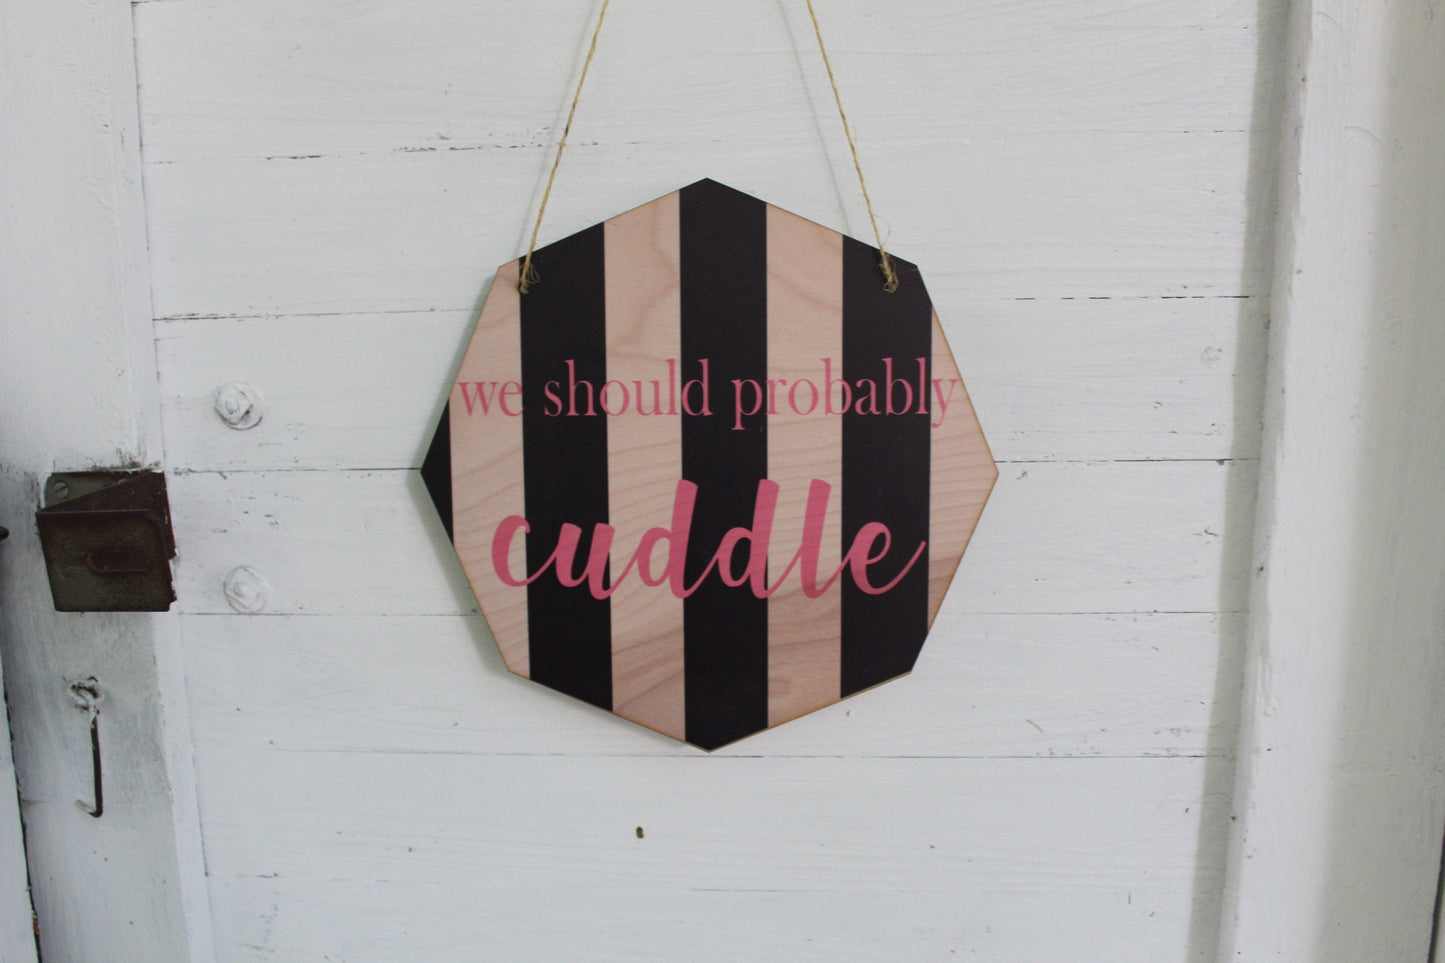 We Should Probably Cuddle Wall Hanging Black and Pink Stripe Shape Art Decoration Love Date Wood Sign Gift Couple Anniversary Gift